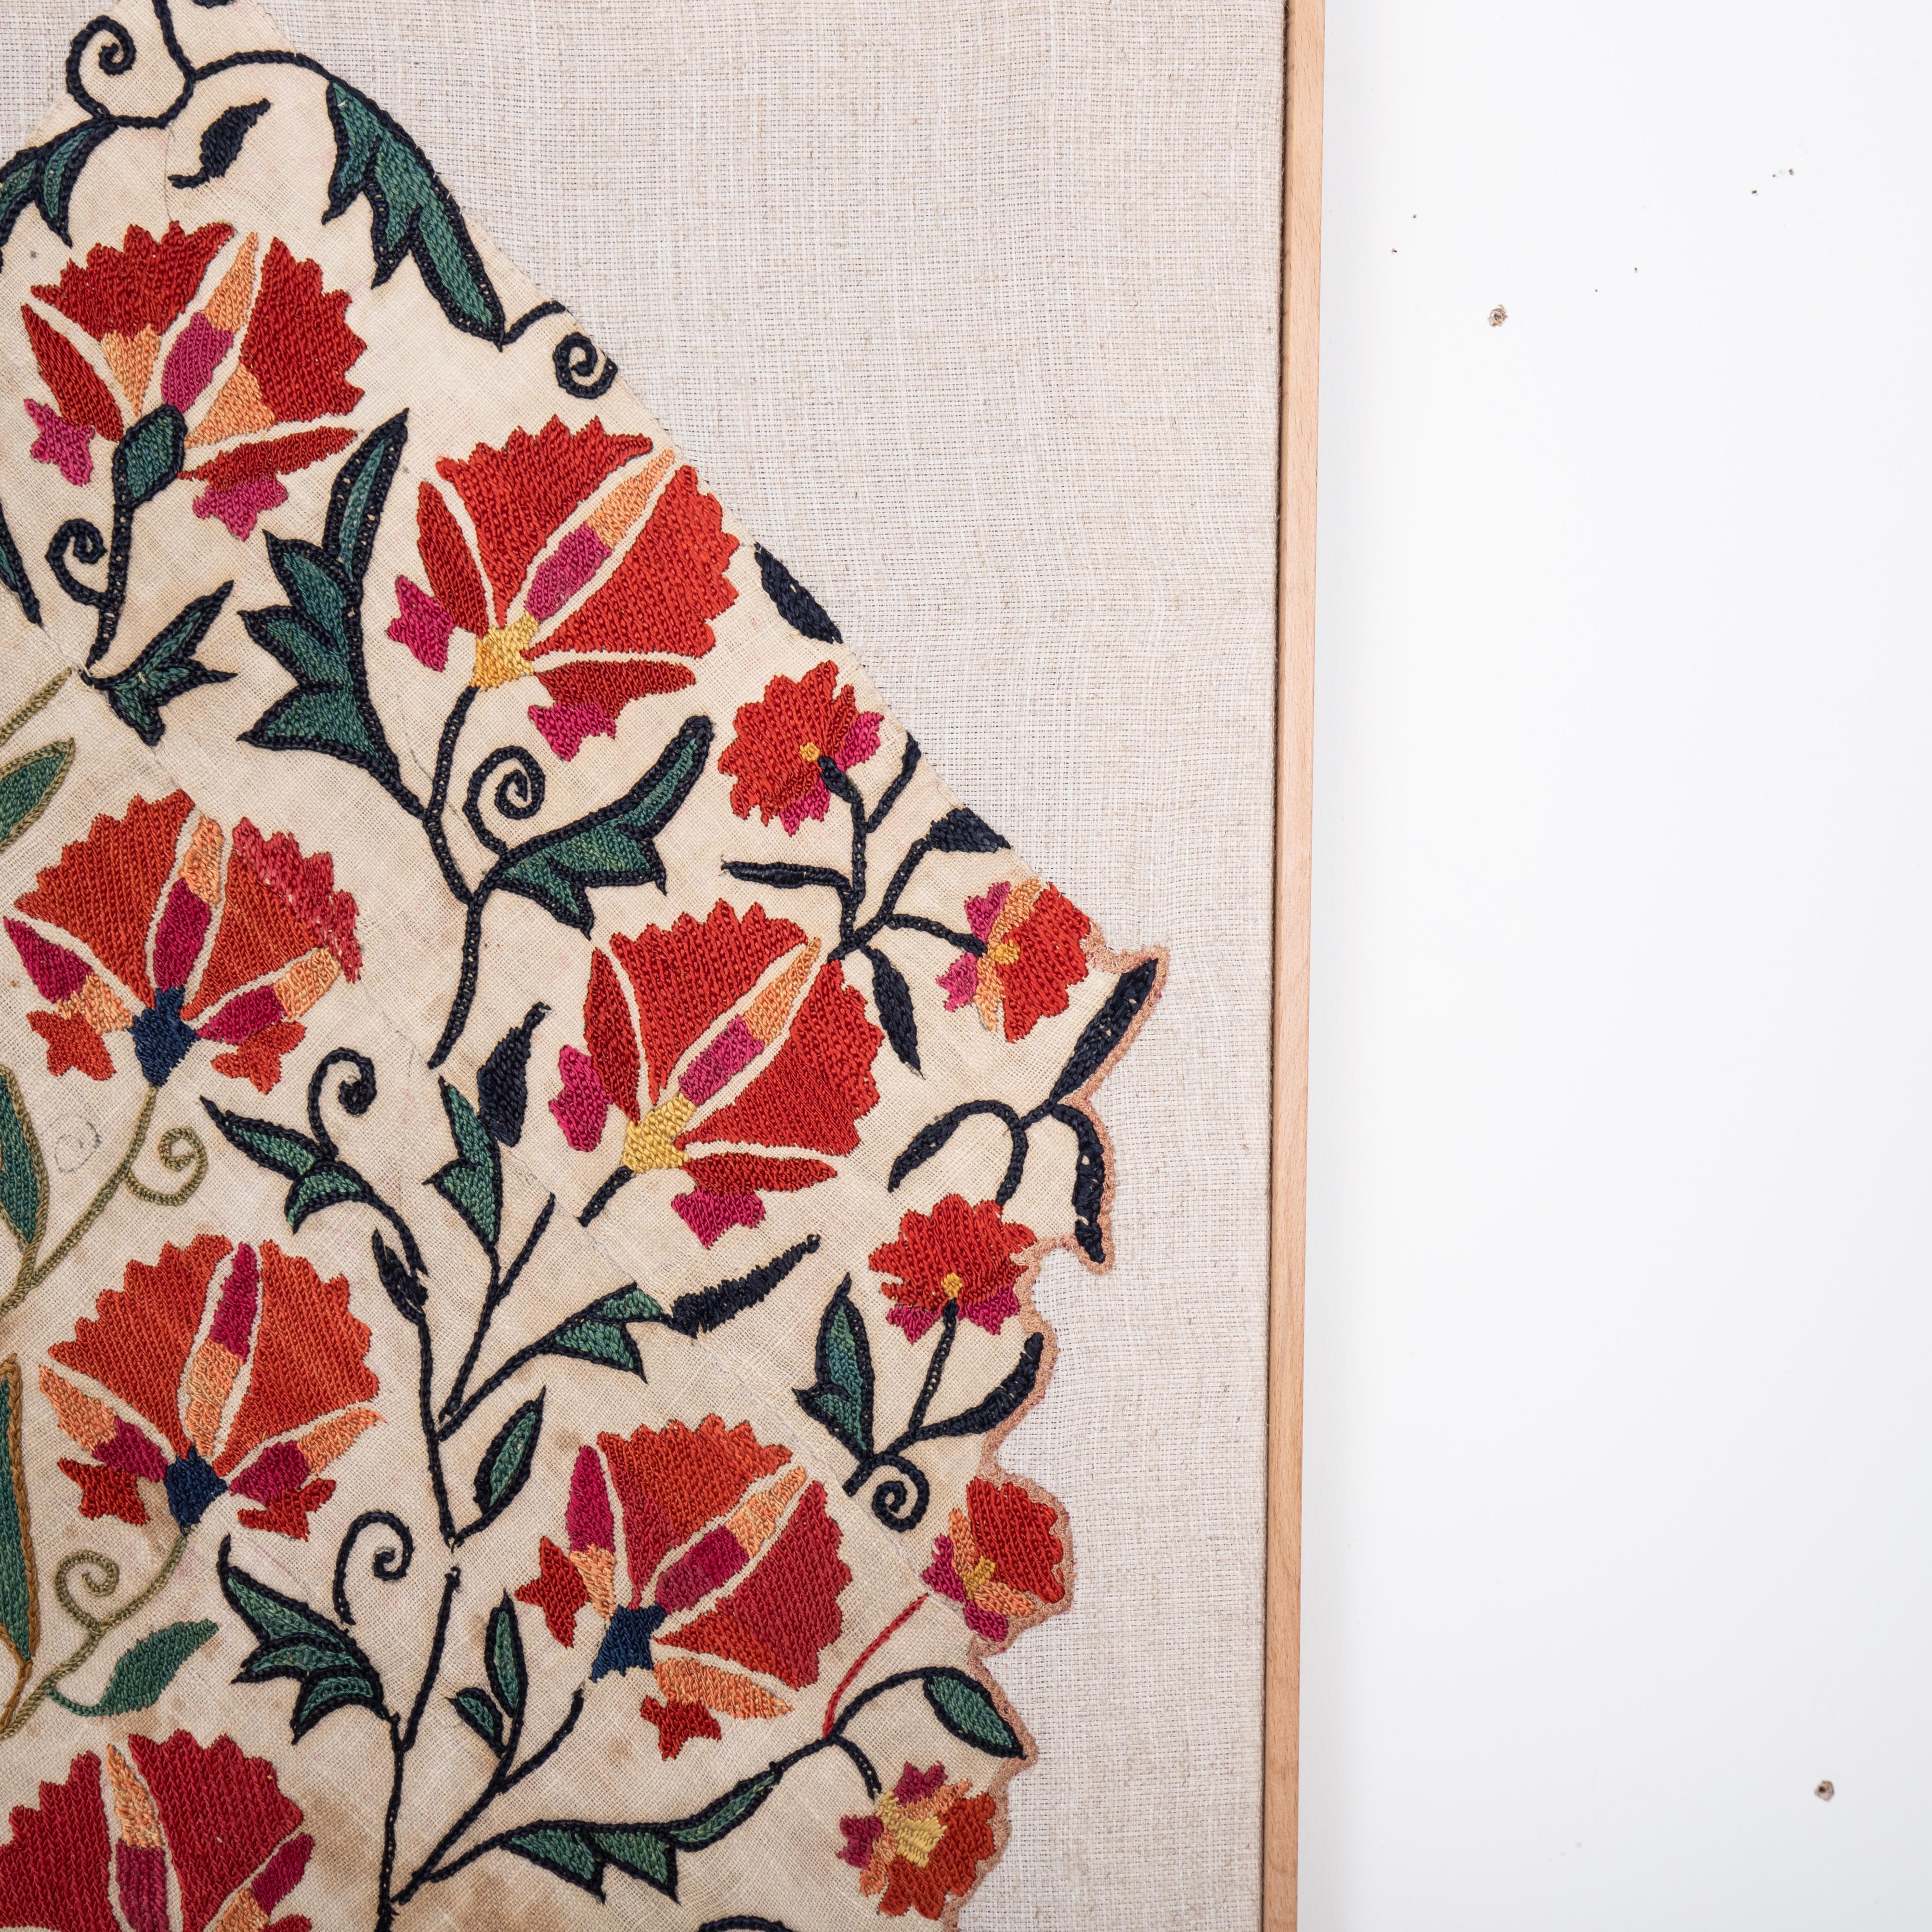 Embroidered Framed Antique Nurata Suzani Fragment, 19th C.